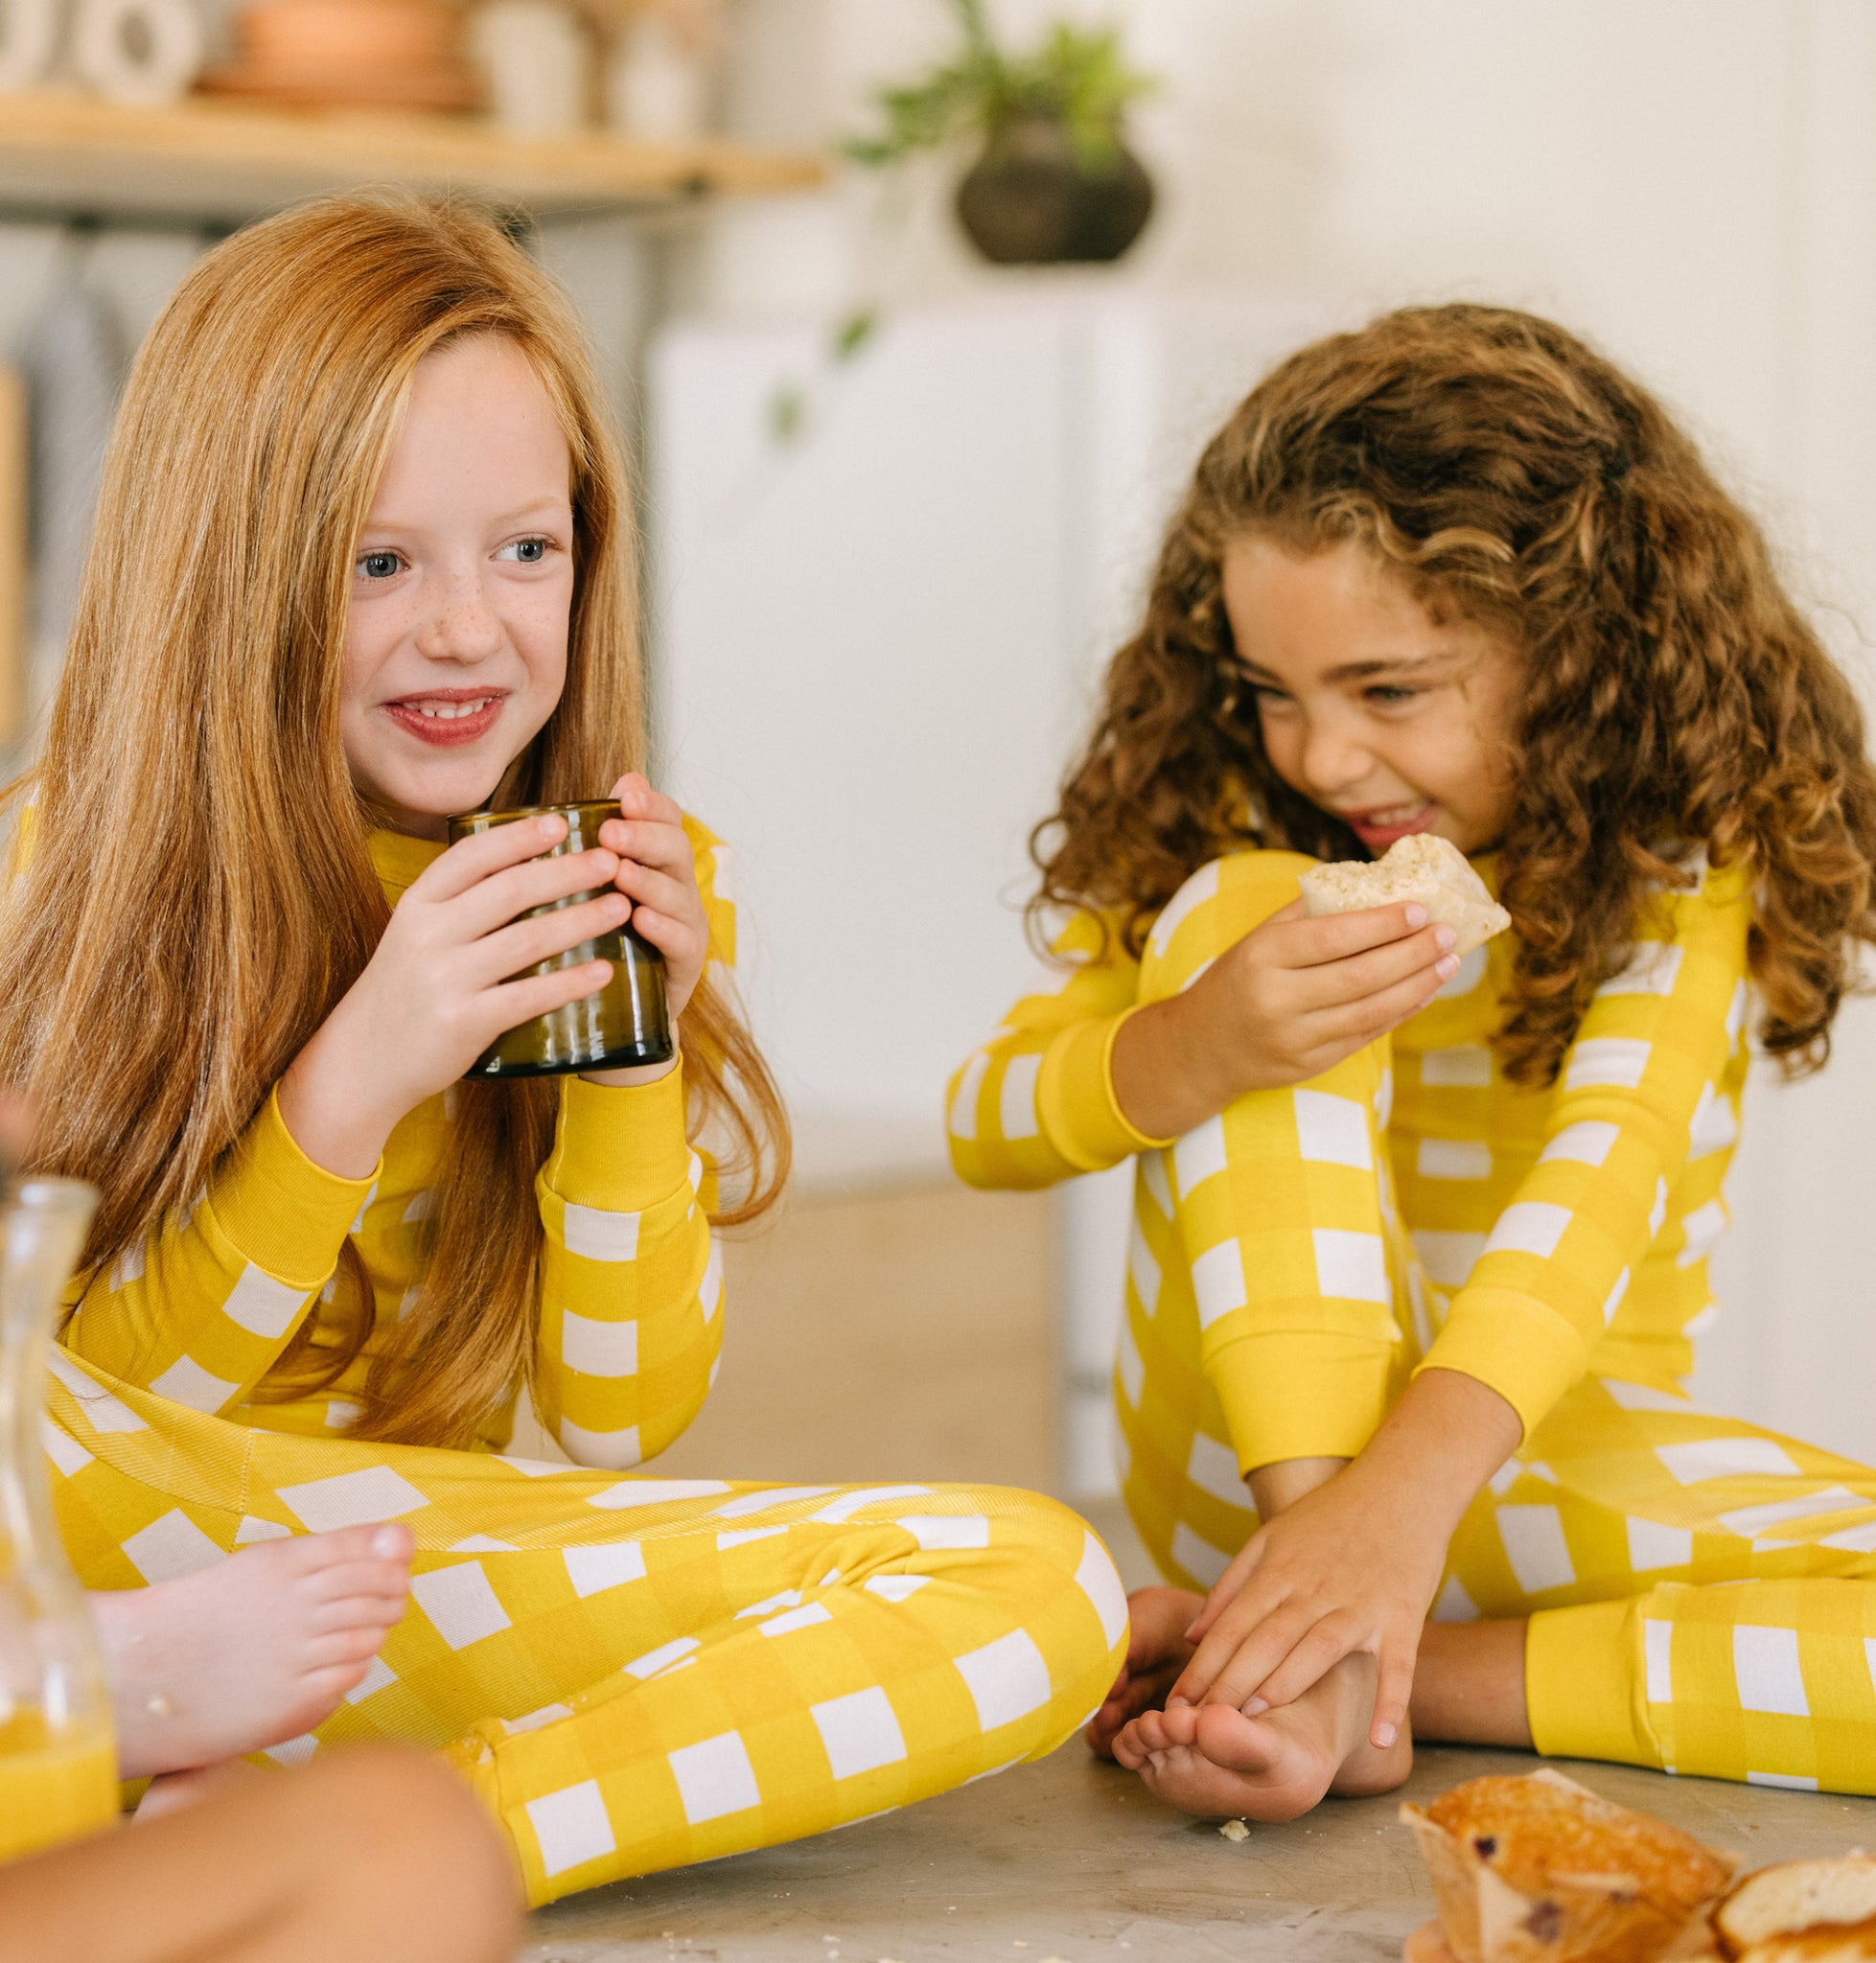 soft, yellow gingham pajama sets worn by two girls drinking orange juice and eating breakfast